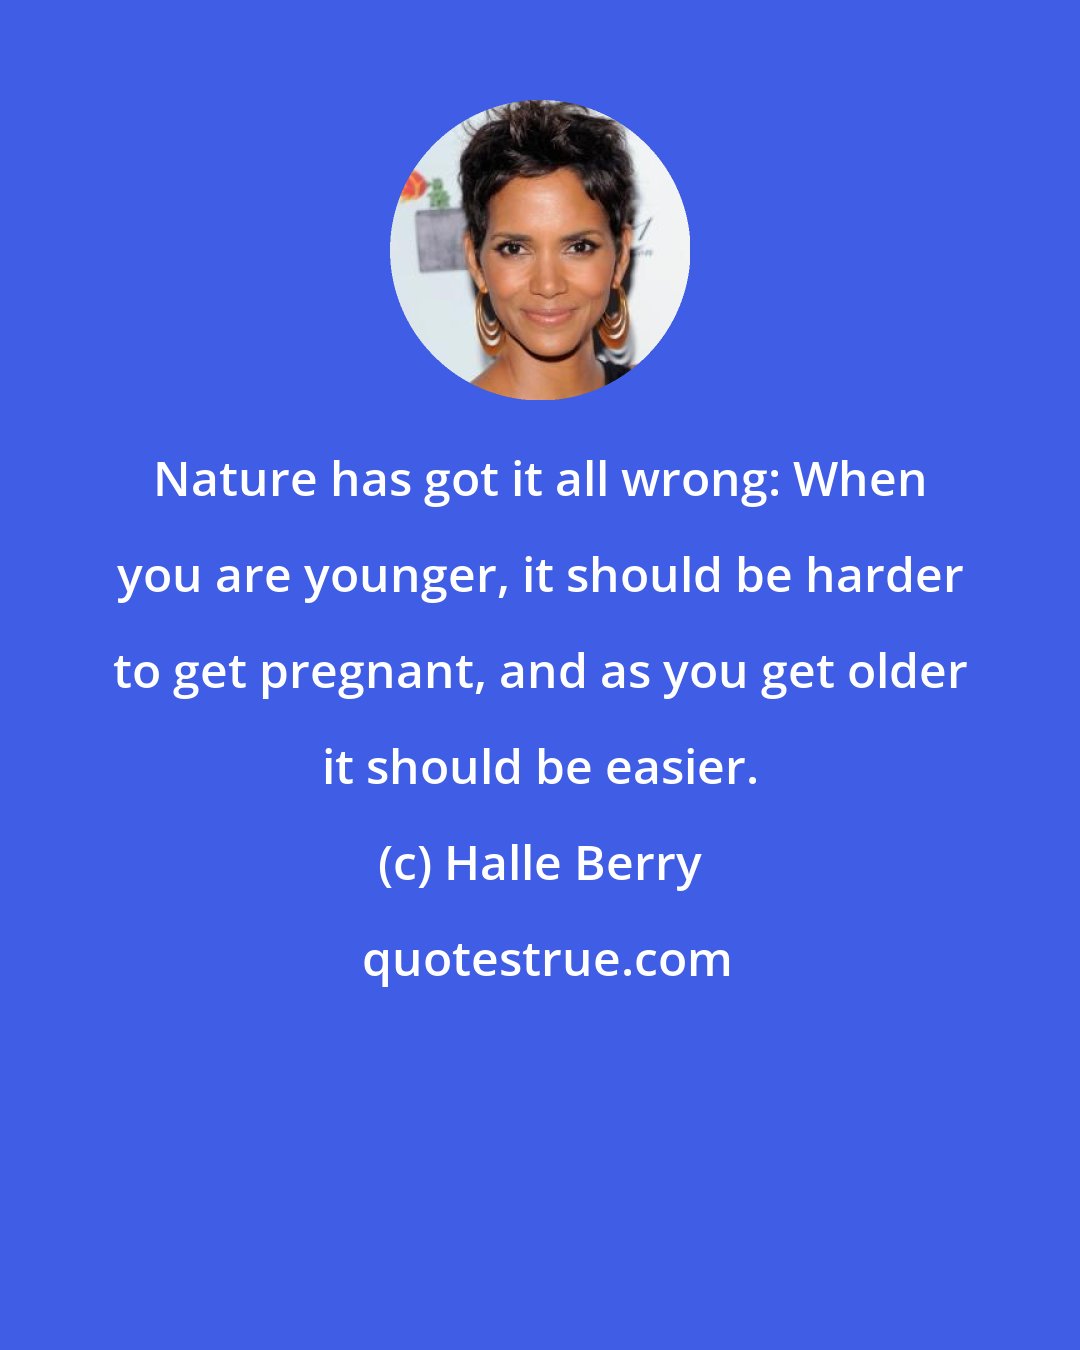 Halle Berry: Nature has got it all wrong: When you are younger, it should be harder to get pregnant, and as you get older it should be easier.